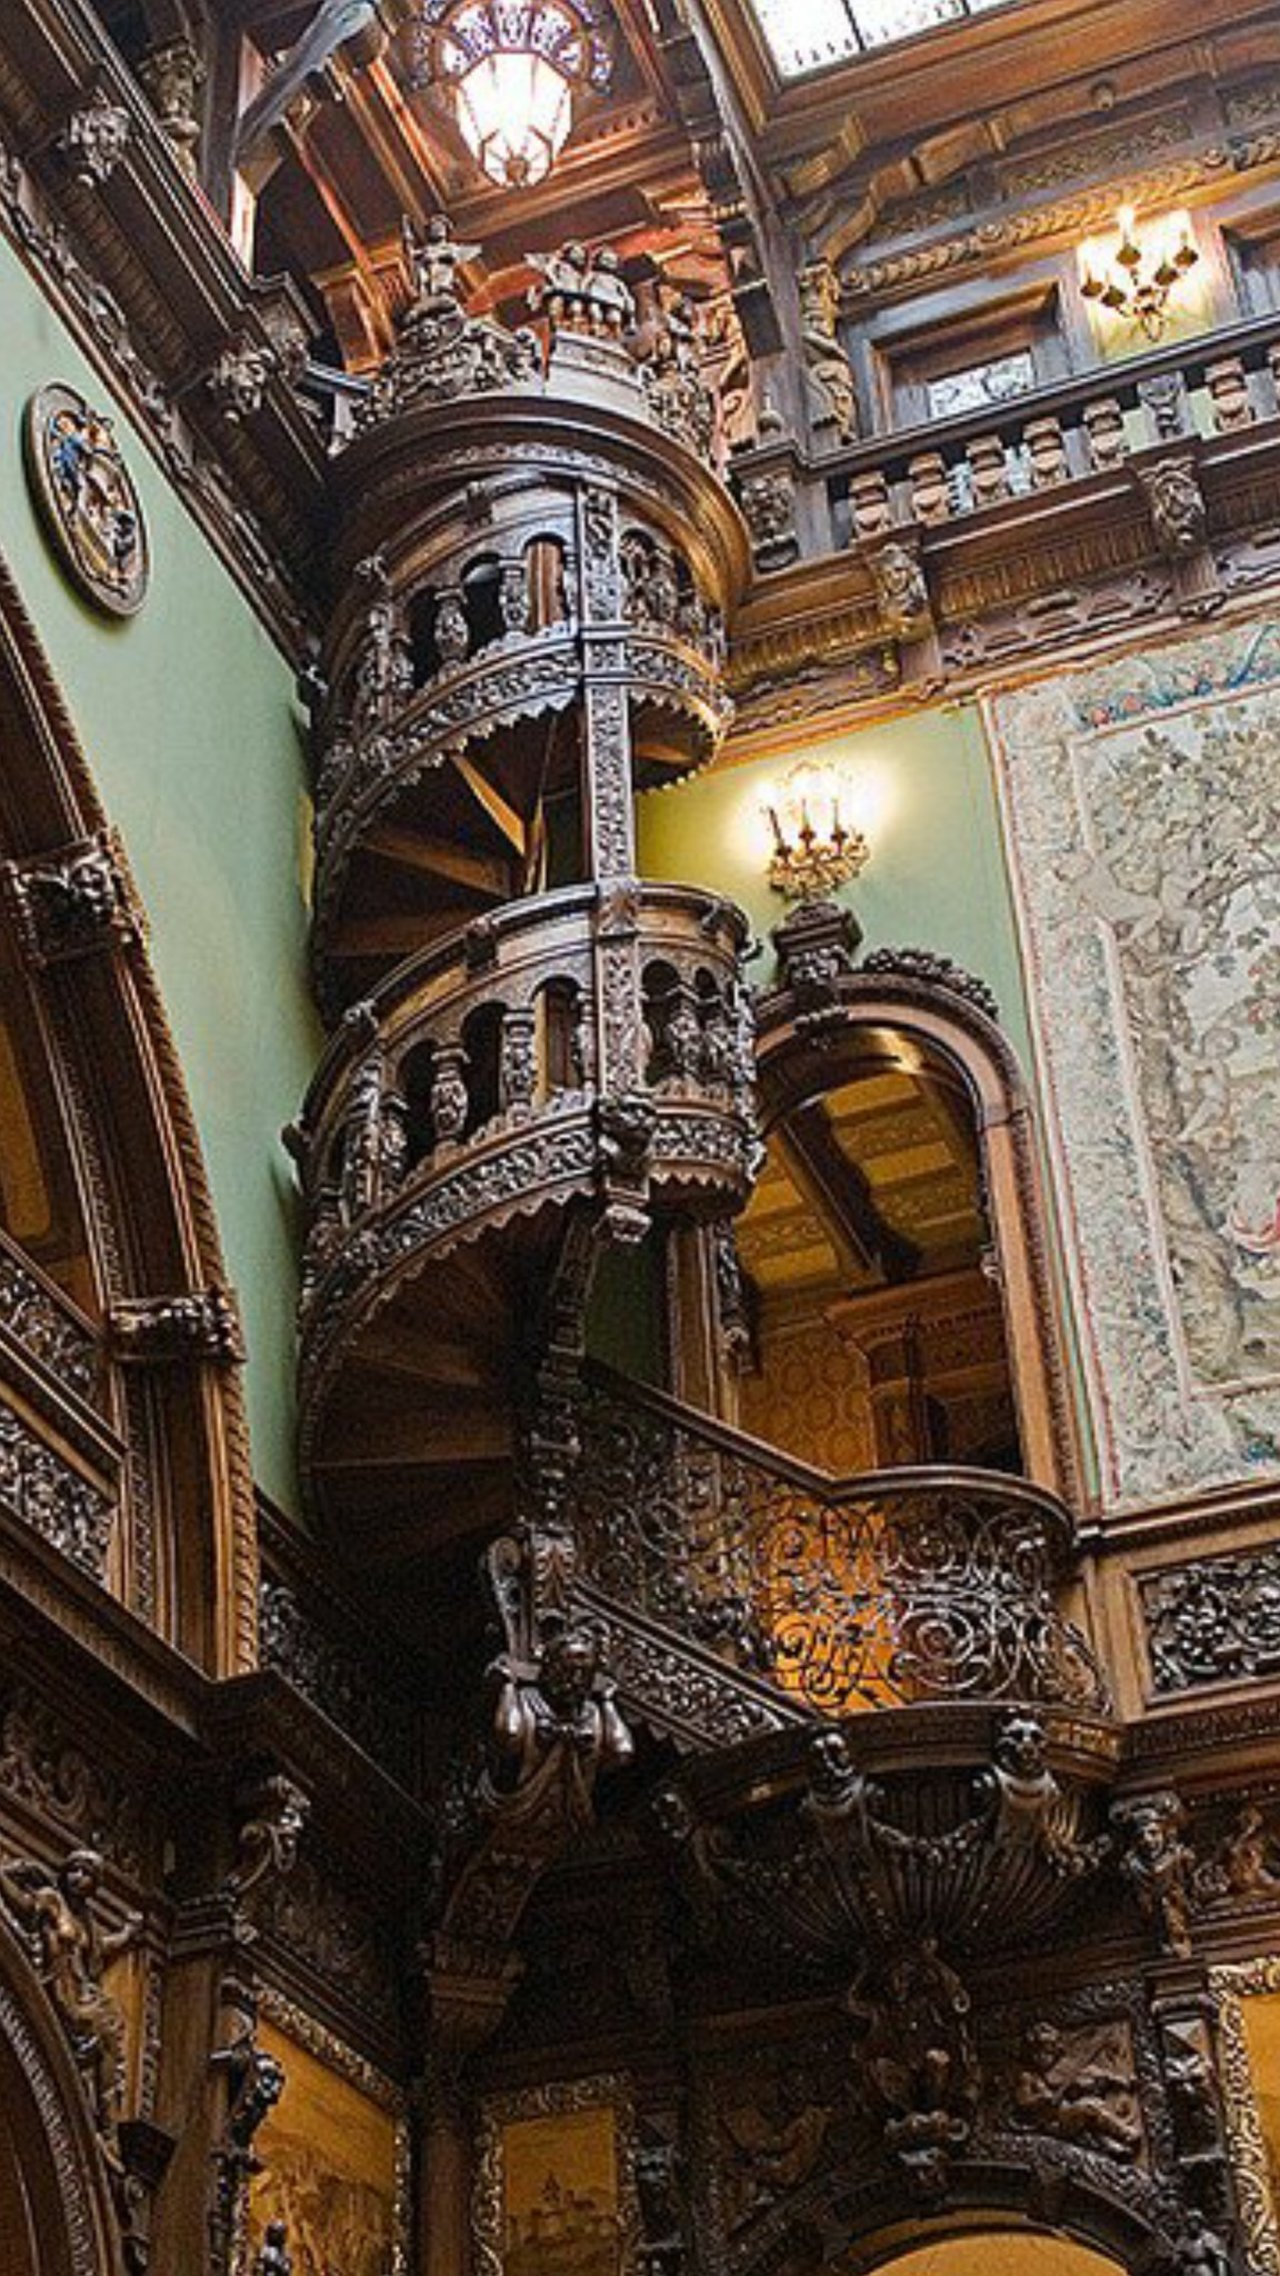 Amazing woodcarved staircase in Romania. #architecture https://t.co/jilsu5mA6d